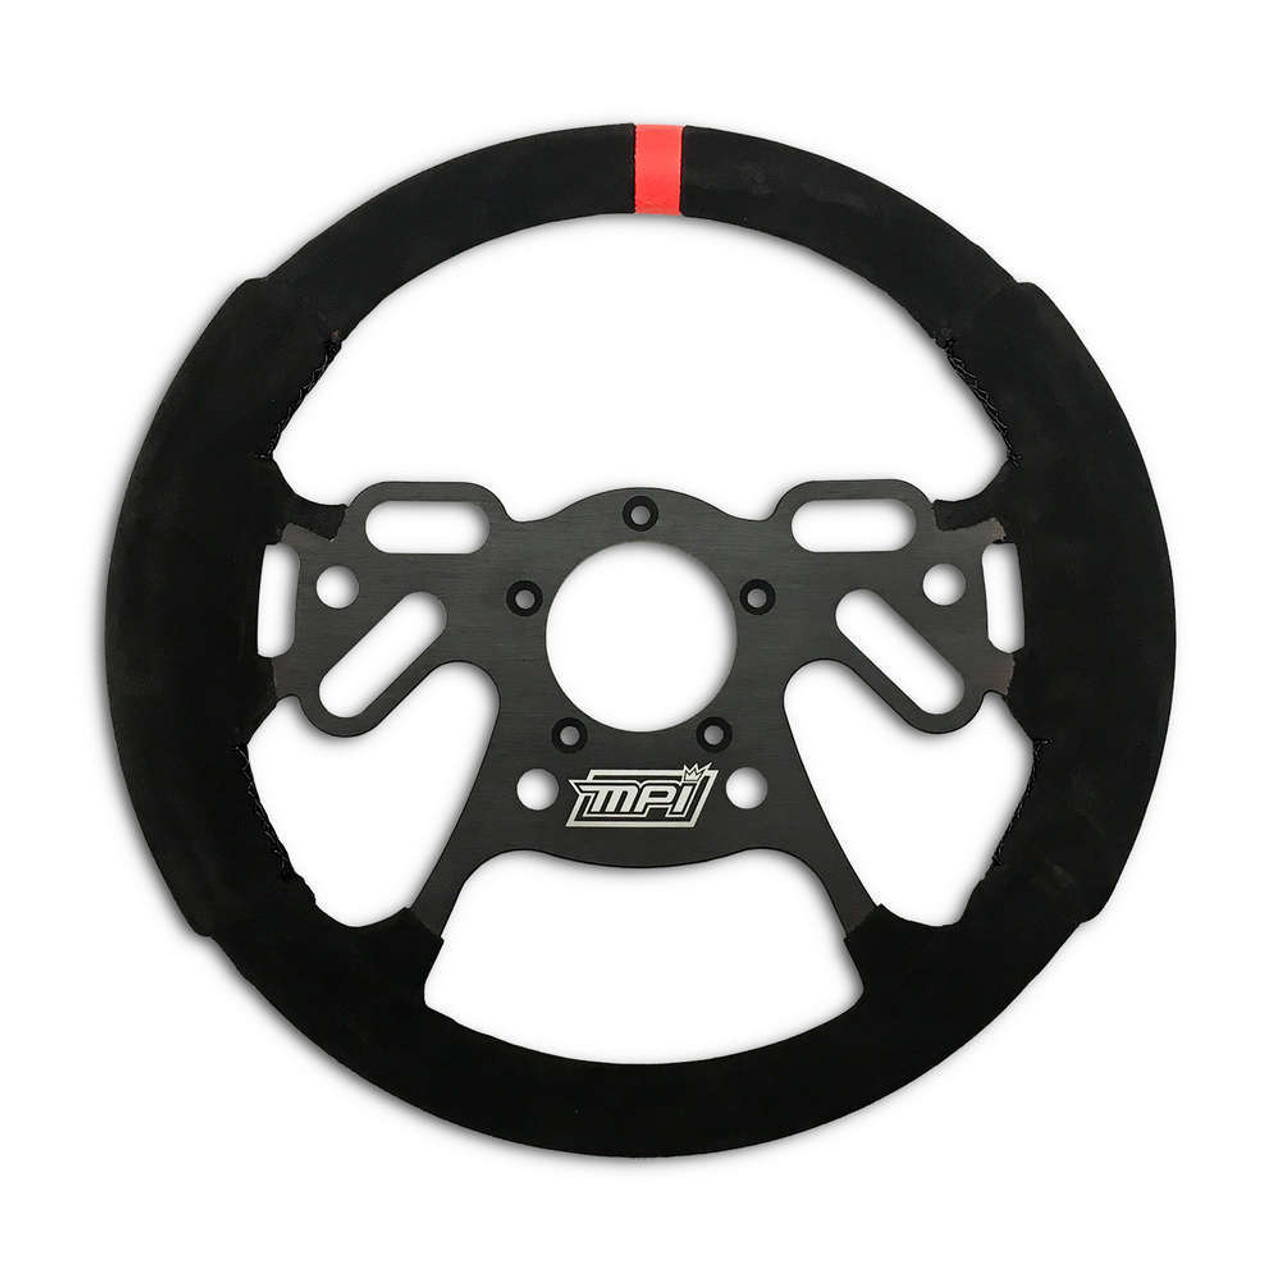 13in 5-Bolt Pro-Stock Drag Wheel Suede